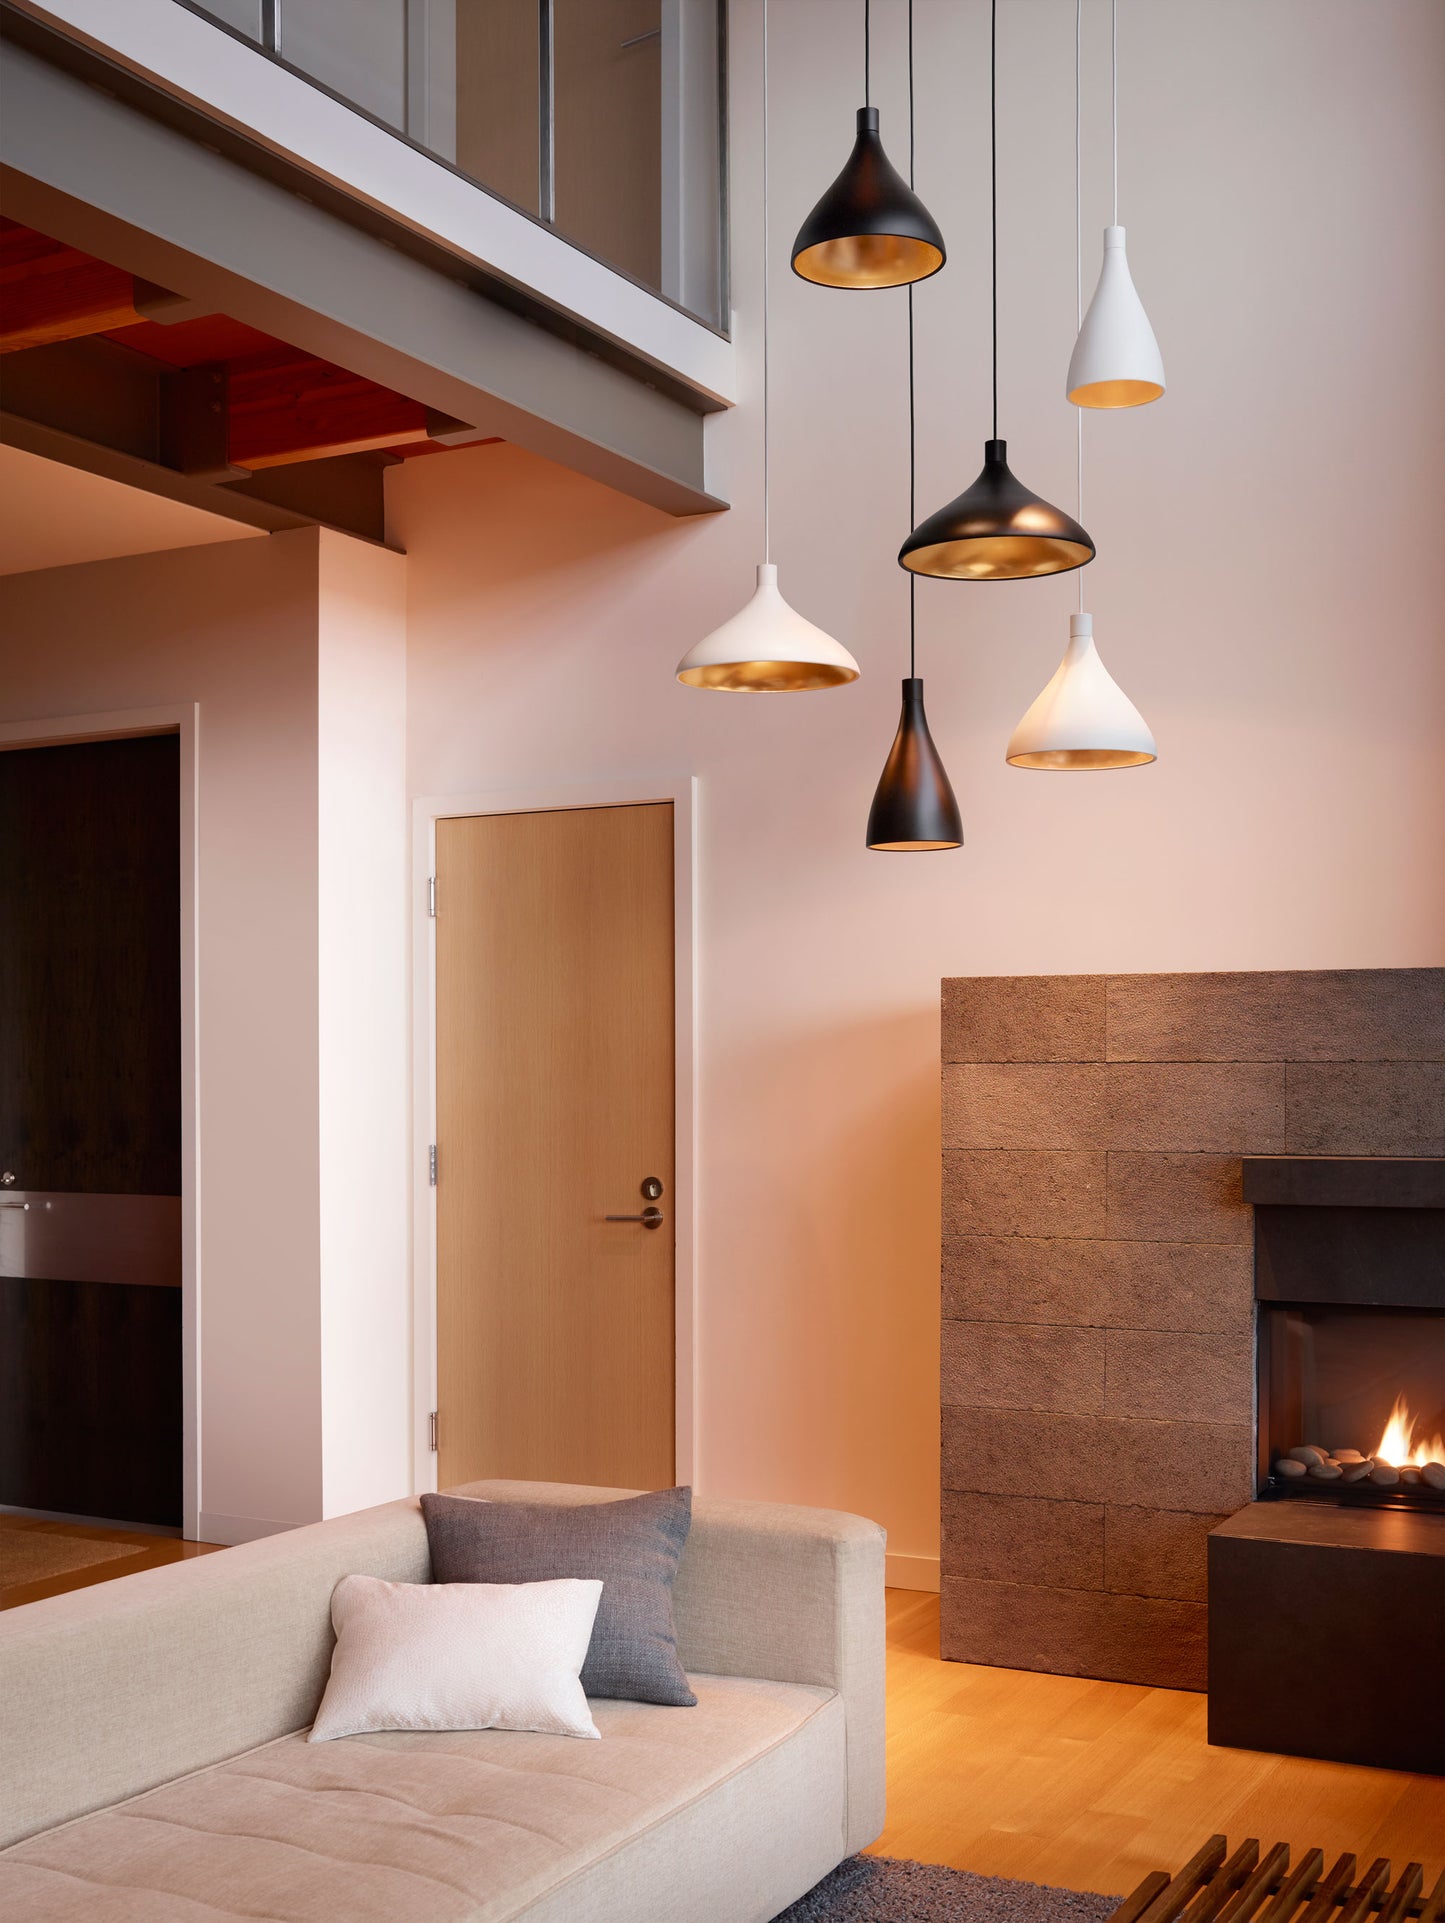 Swell Pendant Light by Pablo Designs